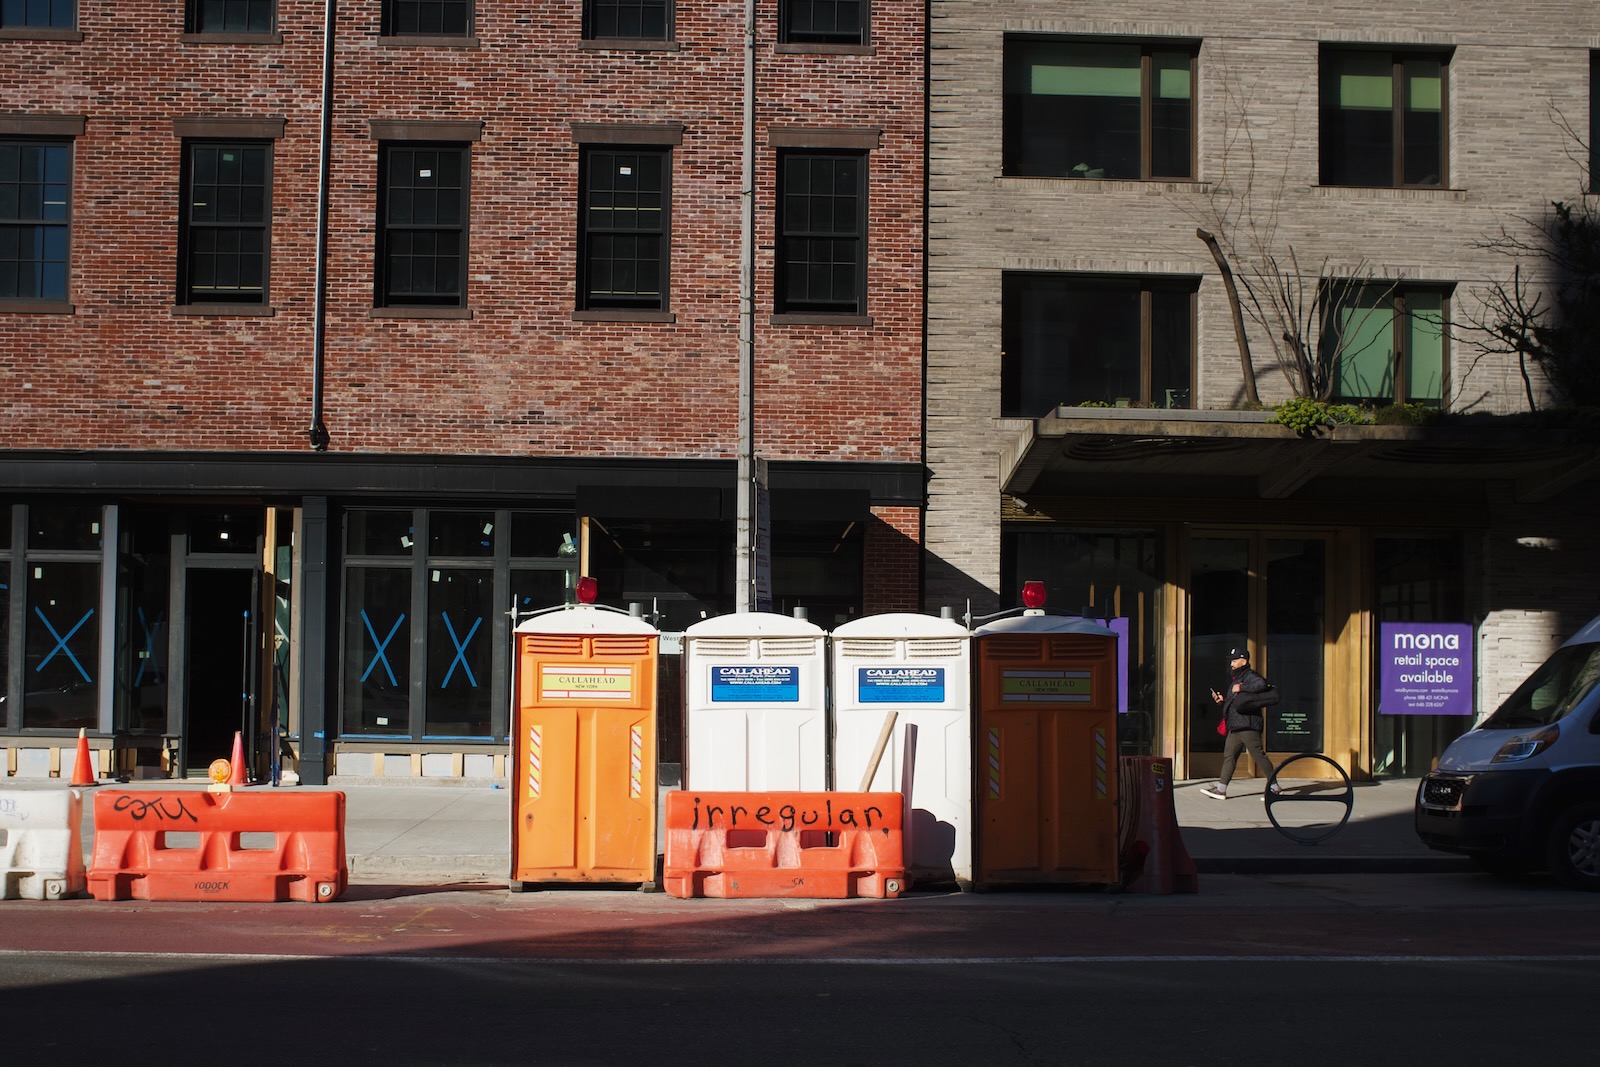 An orange construction barrier with the word “irregular” spray painted on it sits in front of a row of portable toilets.